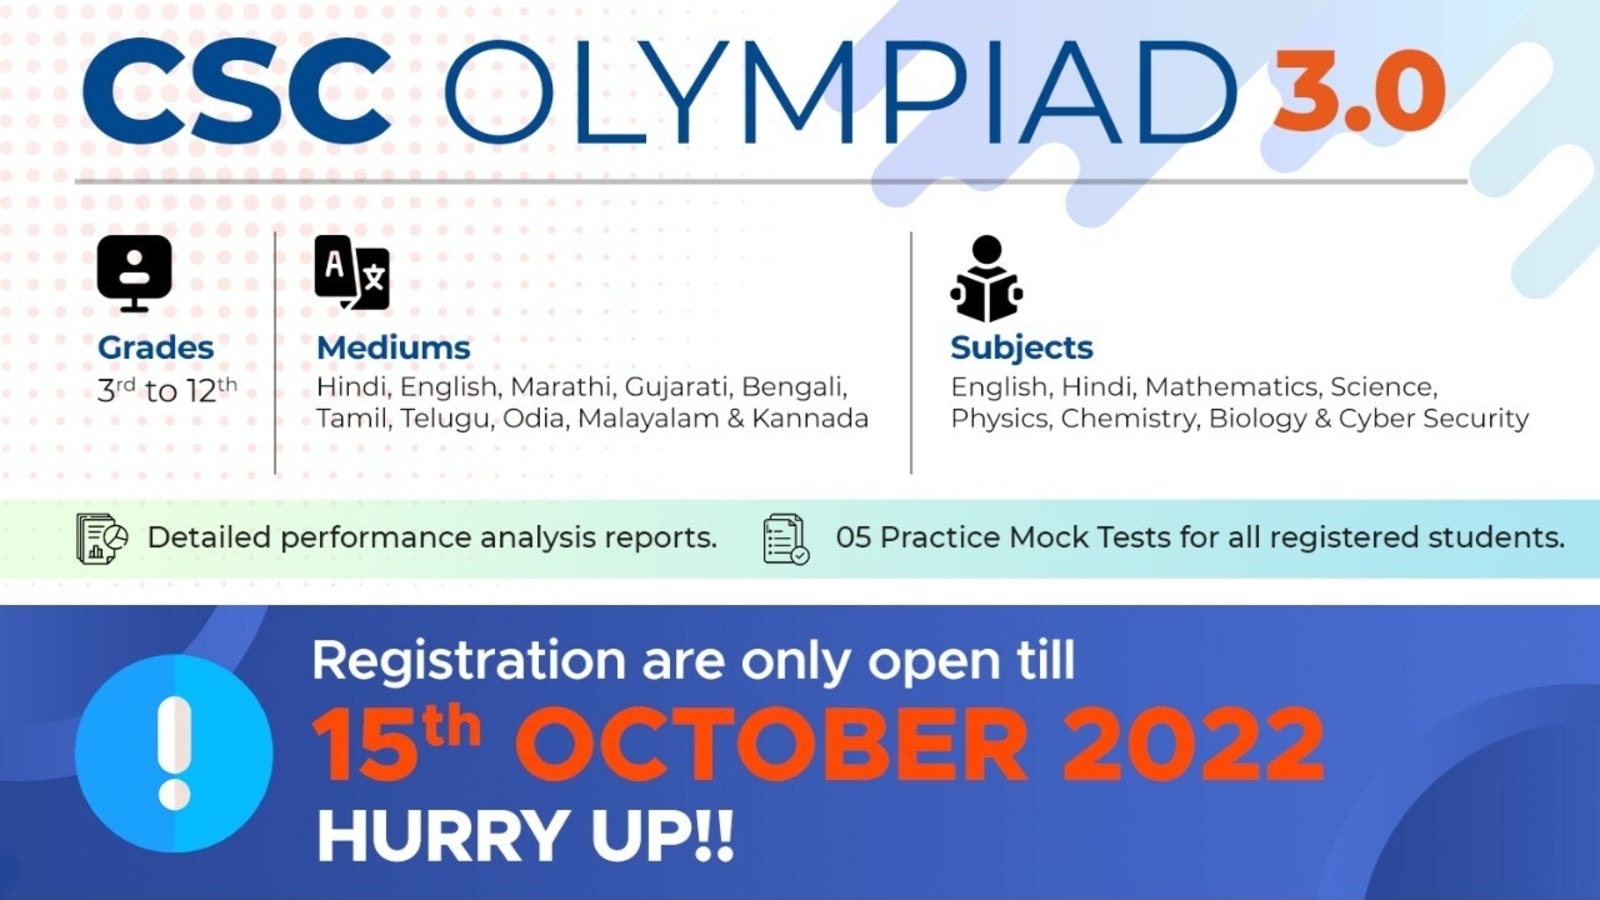 CSC Olympiad 3.0 Classes 312 students can apply till October 15